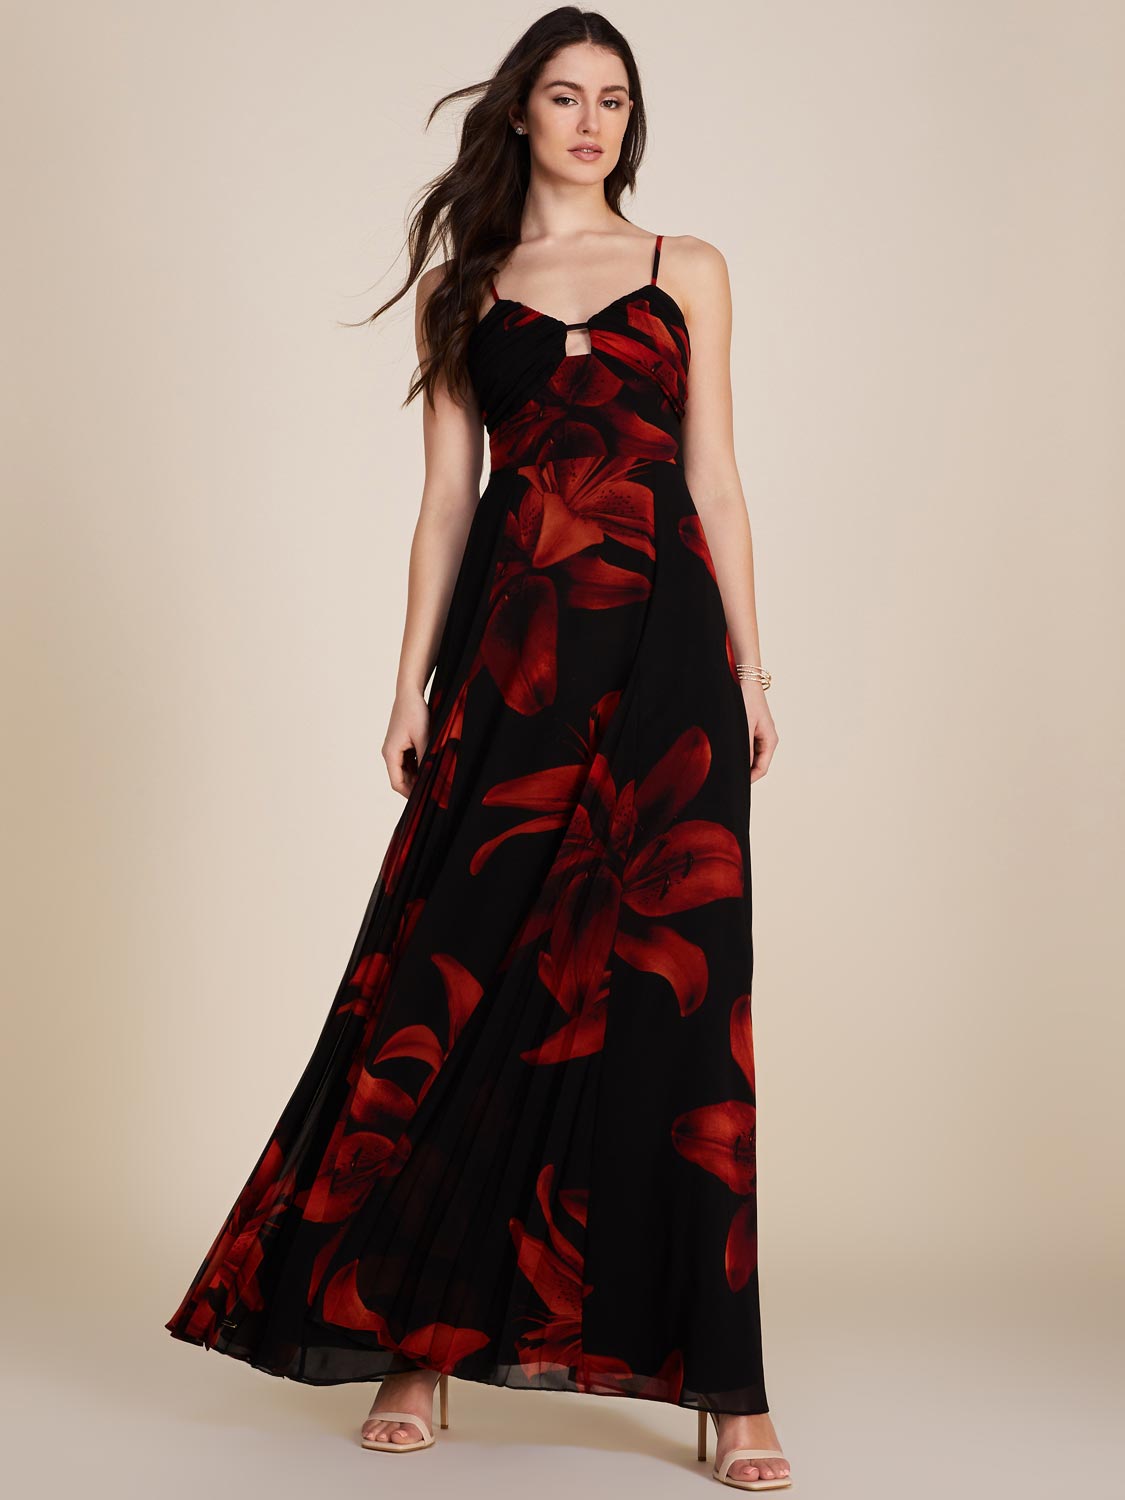 Printed Chiffon Gown With Front Cutout